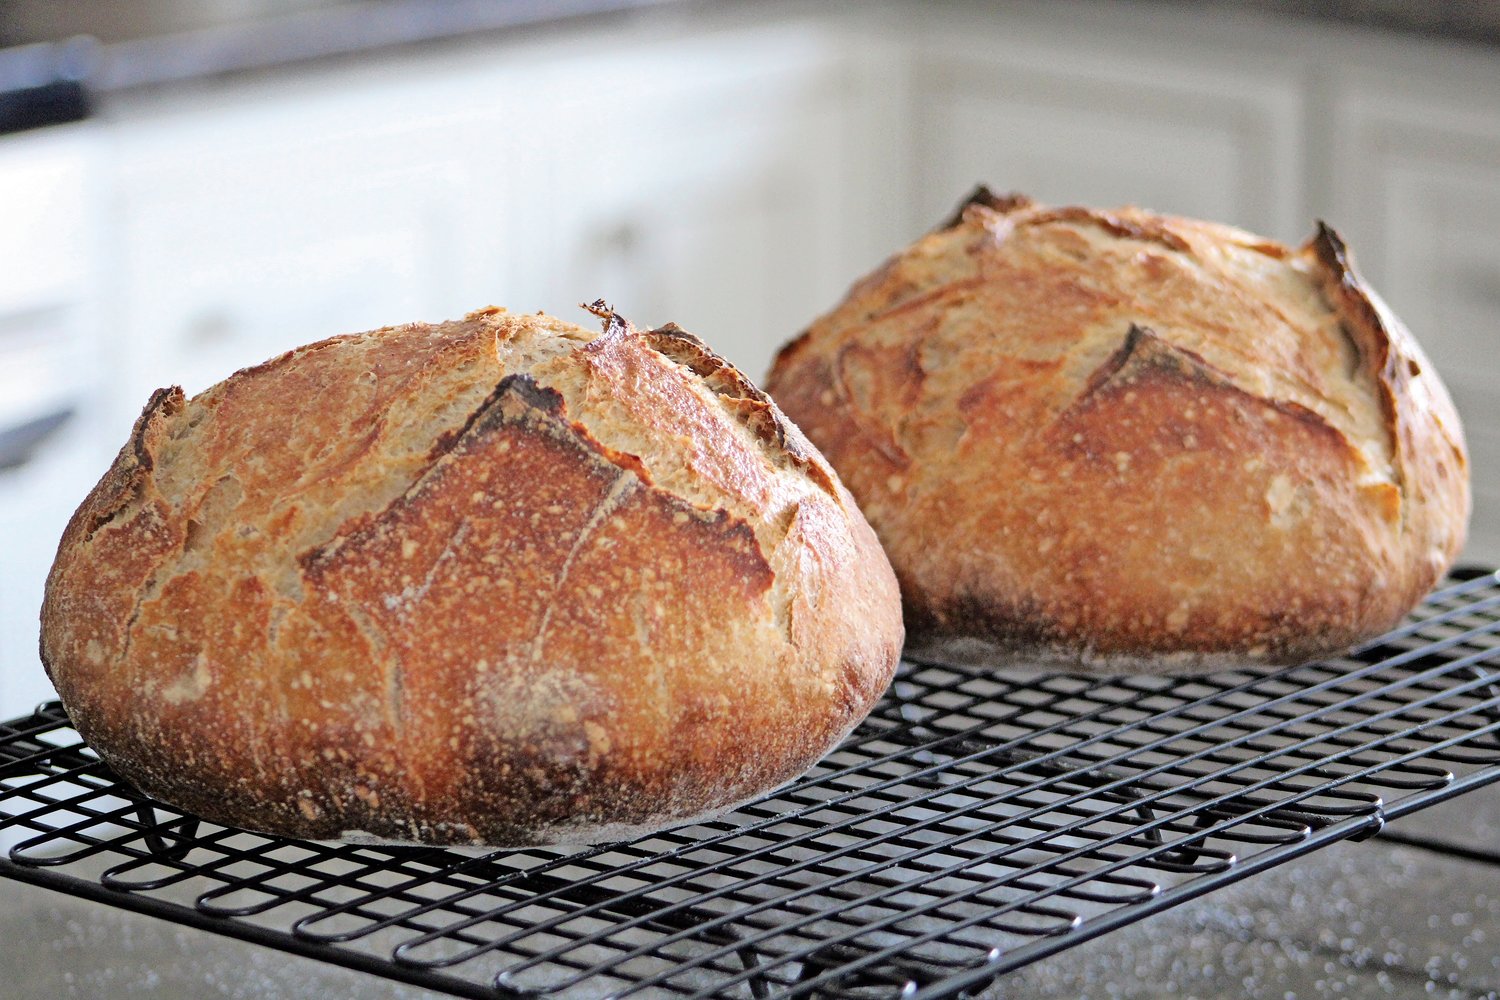 Two sourdough loaves made from Kobler’s sourdough starter. Kobler has also sold focaccia, Irish soda bread and more.